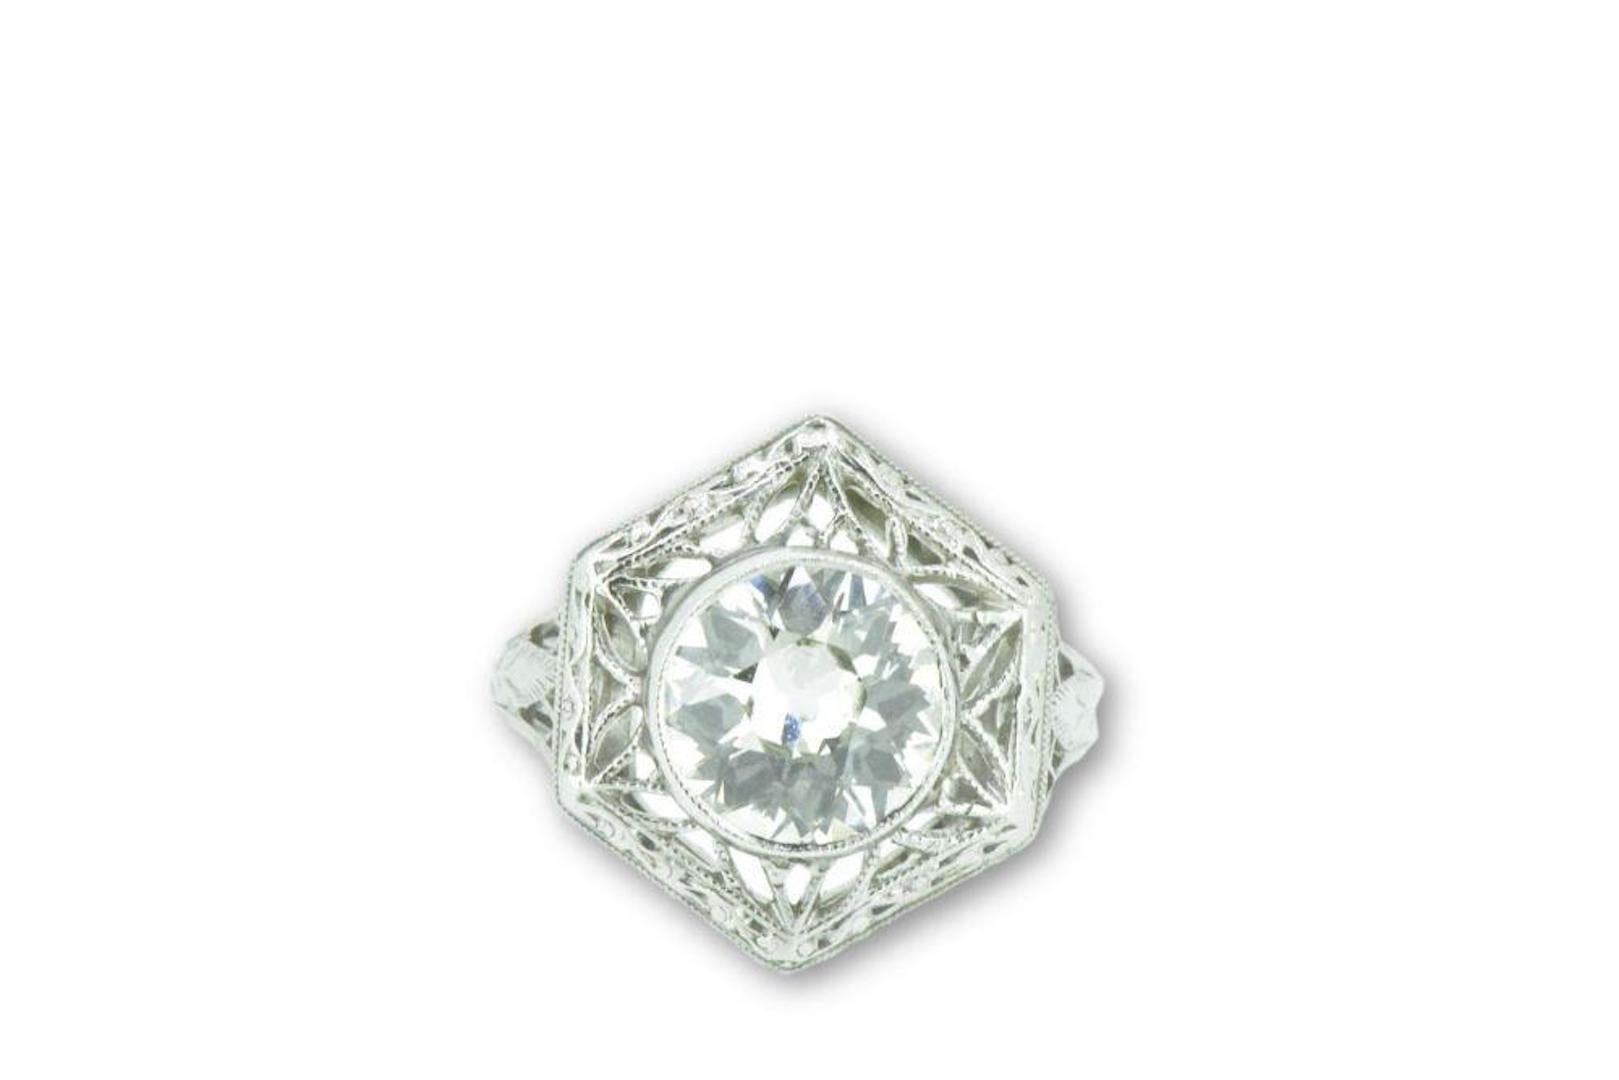 Centering an old European cut diamond  weighing 1.19 carats, L color and VS1 clarity

Striking Art Deco platinum mount featuring a geometric filigree design with hand engraved details

Ring Size: 3 1/2 & Sizable

Top measures 14.6 mm and sits 5.1 mm